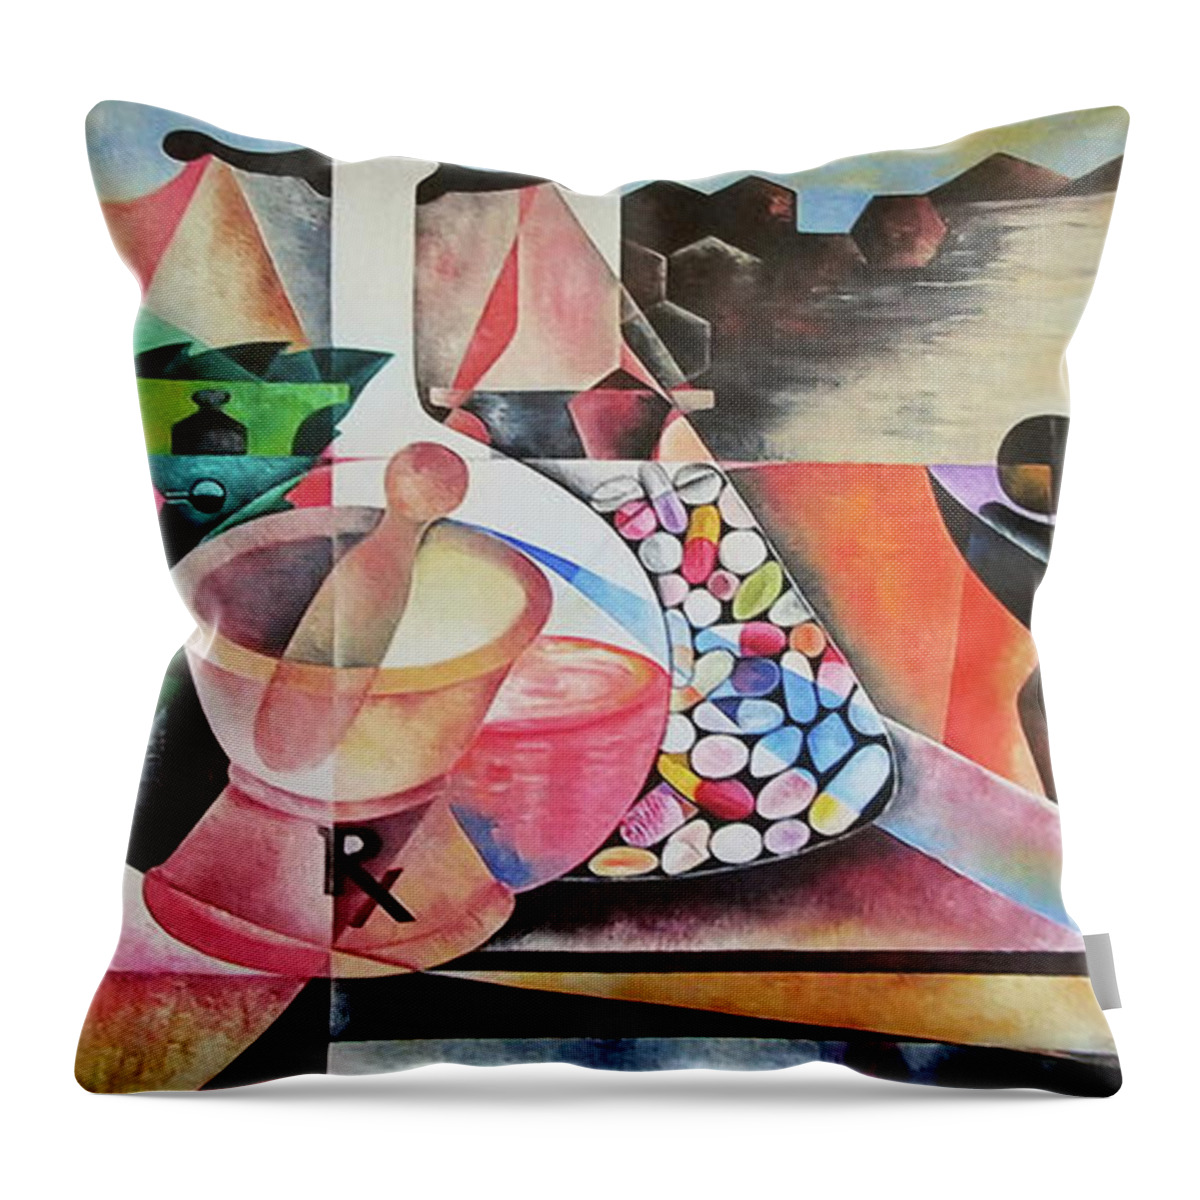 The Art Of Pharmacy Throw Pillow featuring the painting The Art of Pharmacy by Obi-Tabot Tabe